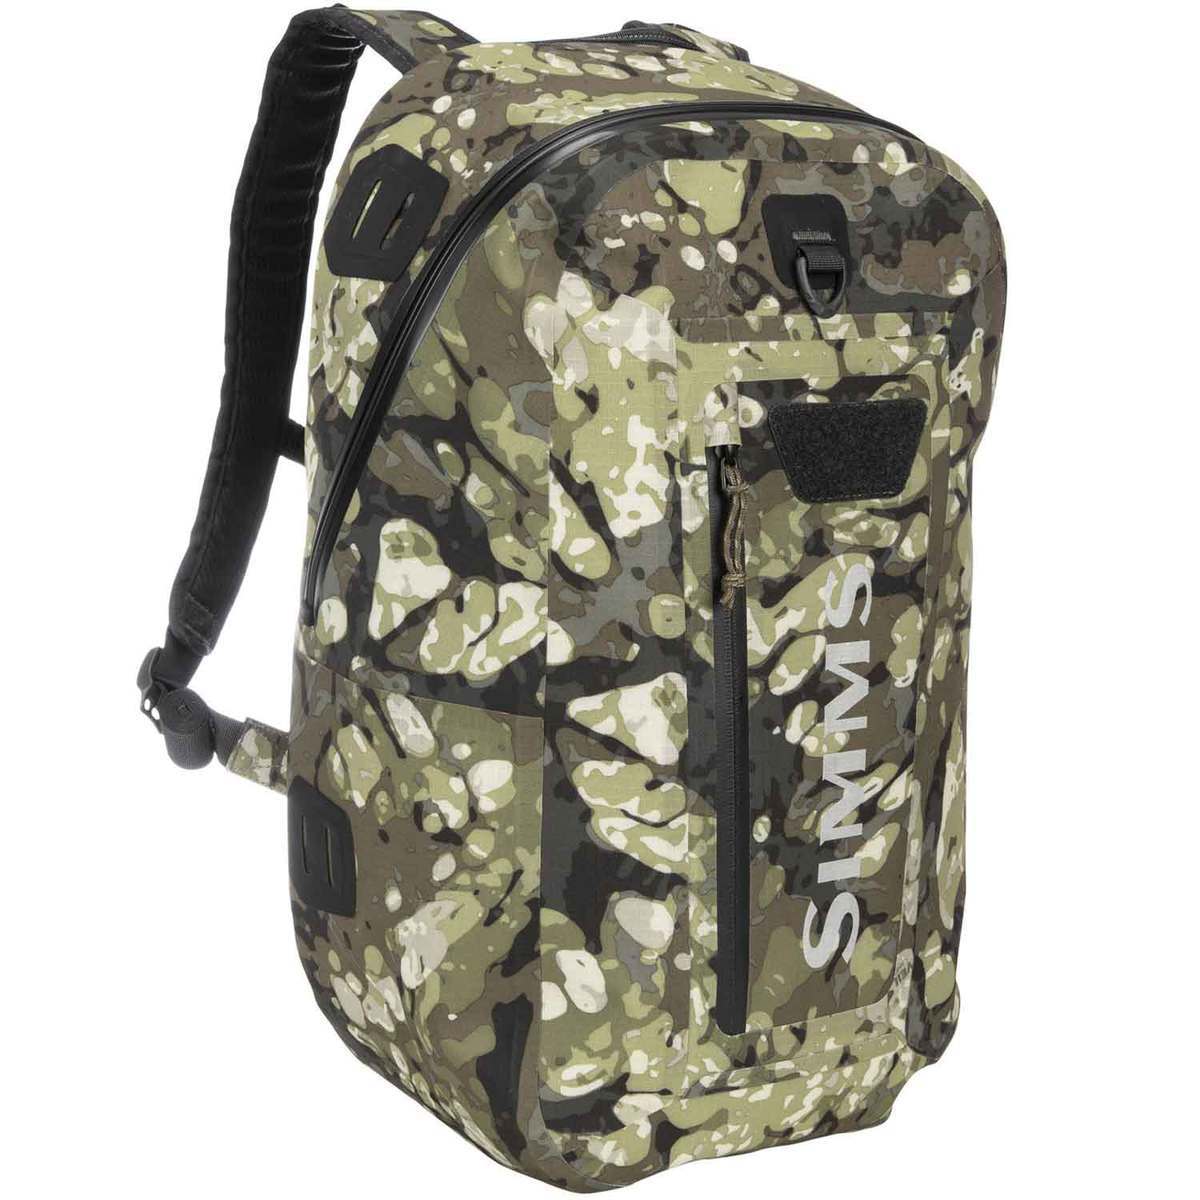 Simms Dry Creek Z Fishing Tackle Backpack | Sportsman's Warehouse